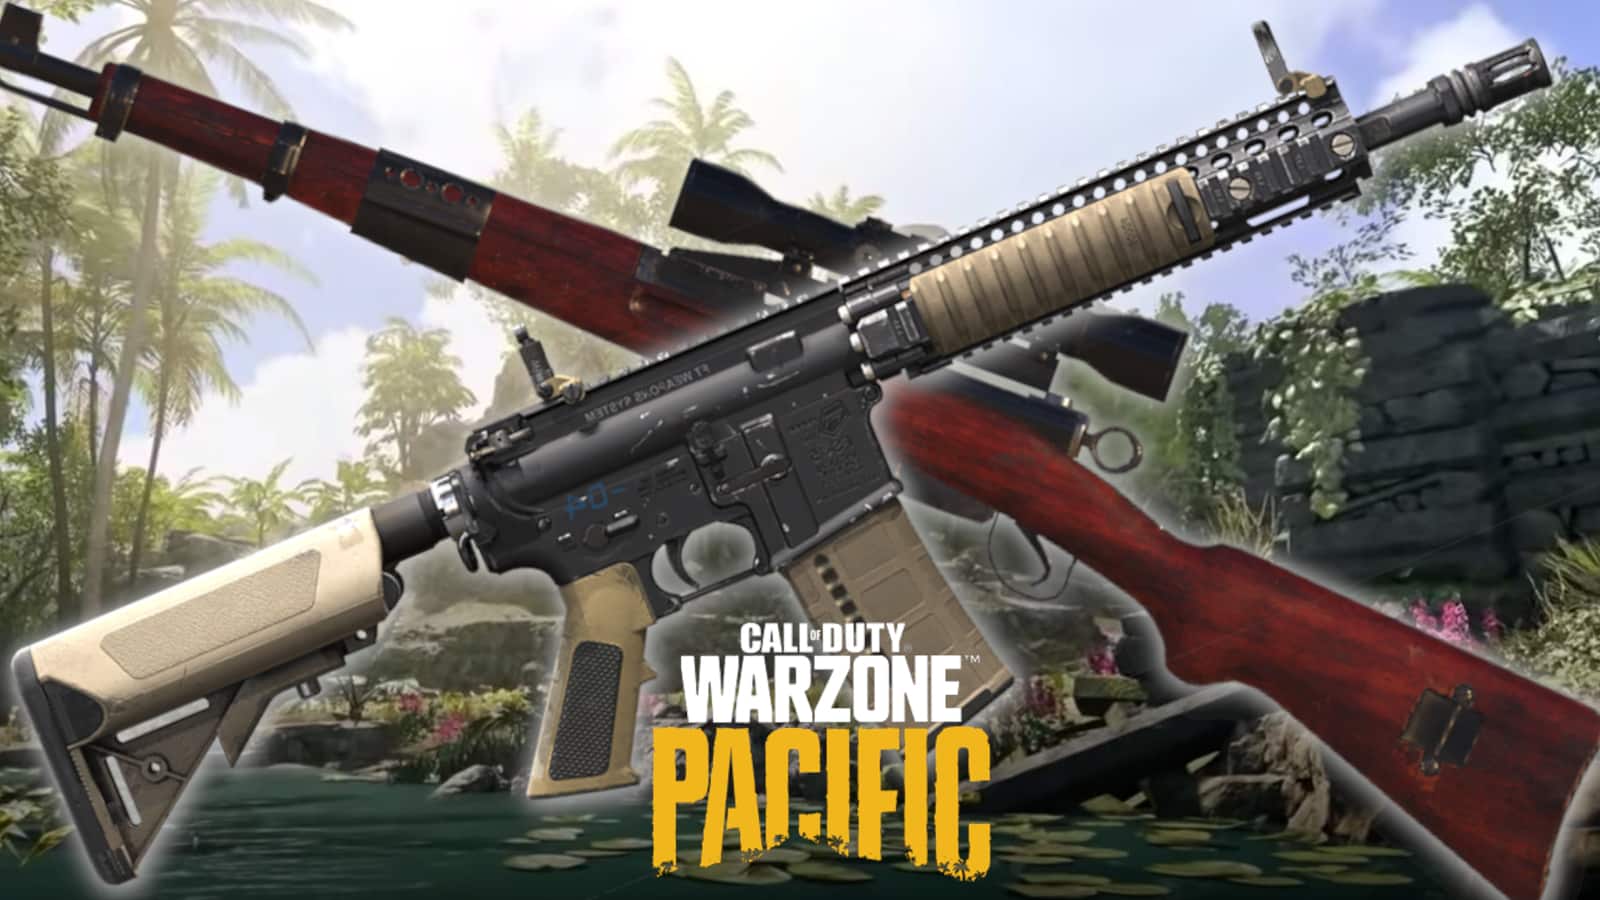 call of duty warzone pacific m4a1 swiss k31